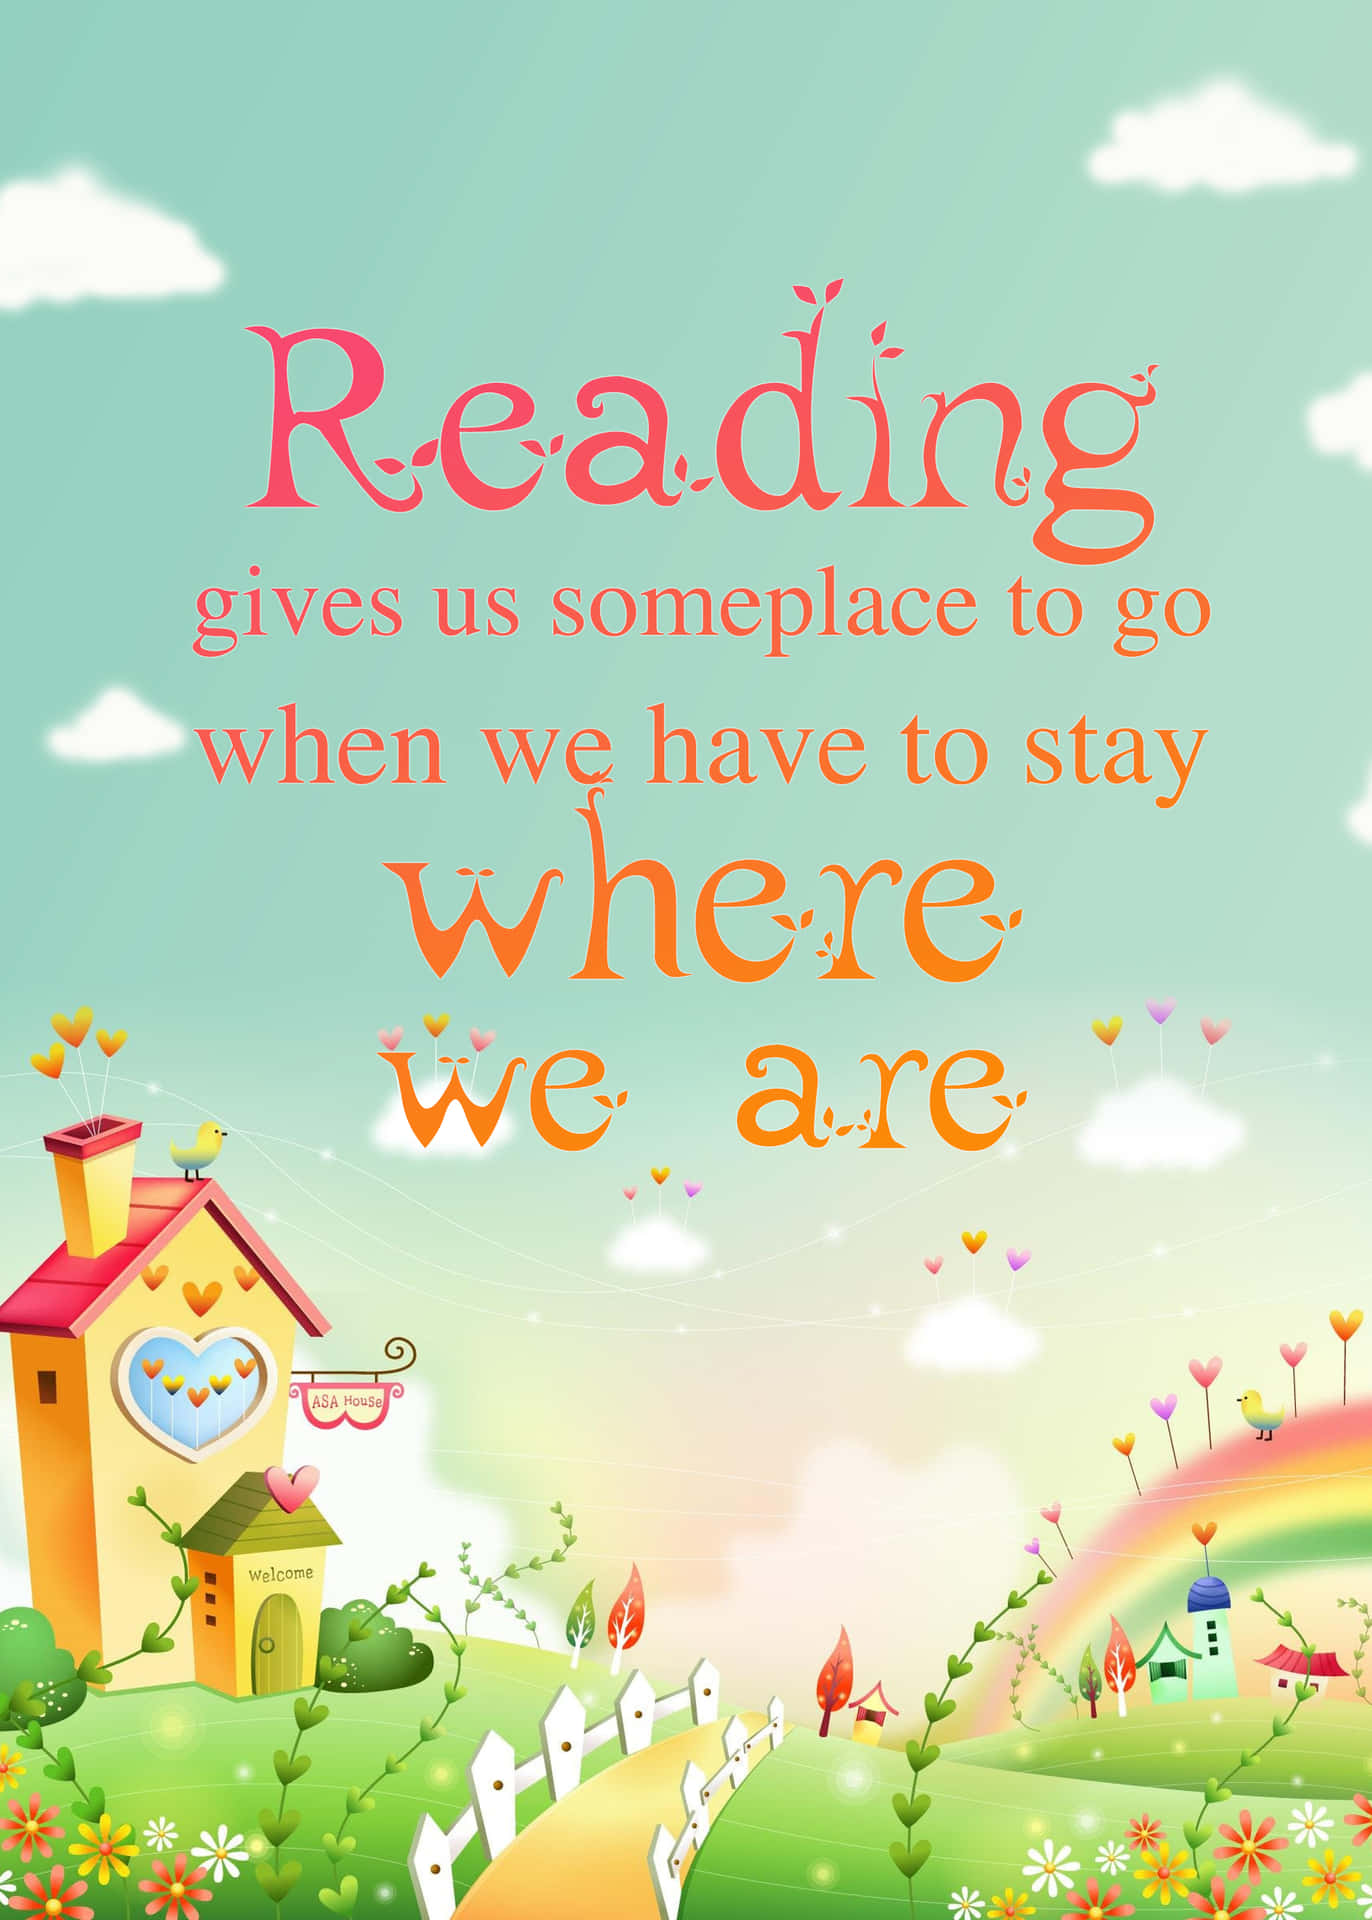 Explore the world with a good book!